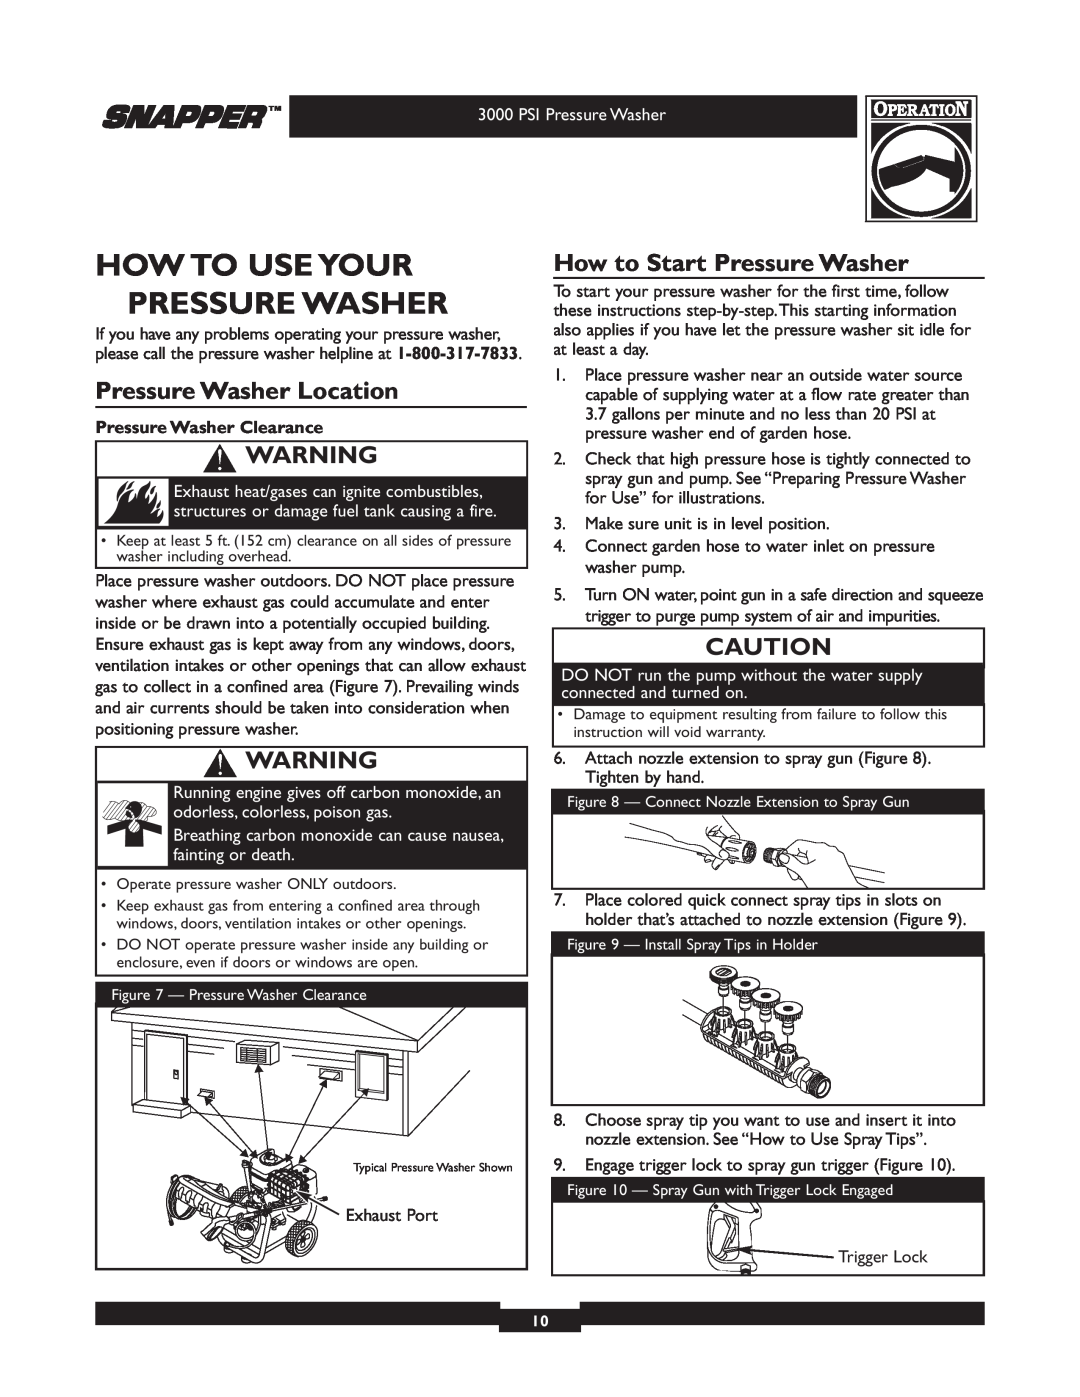 Snapper 020231-2 manual How To Use Your Pressure Washer, Pressure Washer Location, How to Start Pressure Washer 